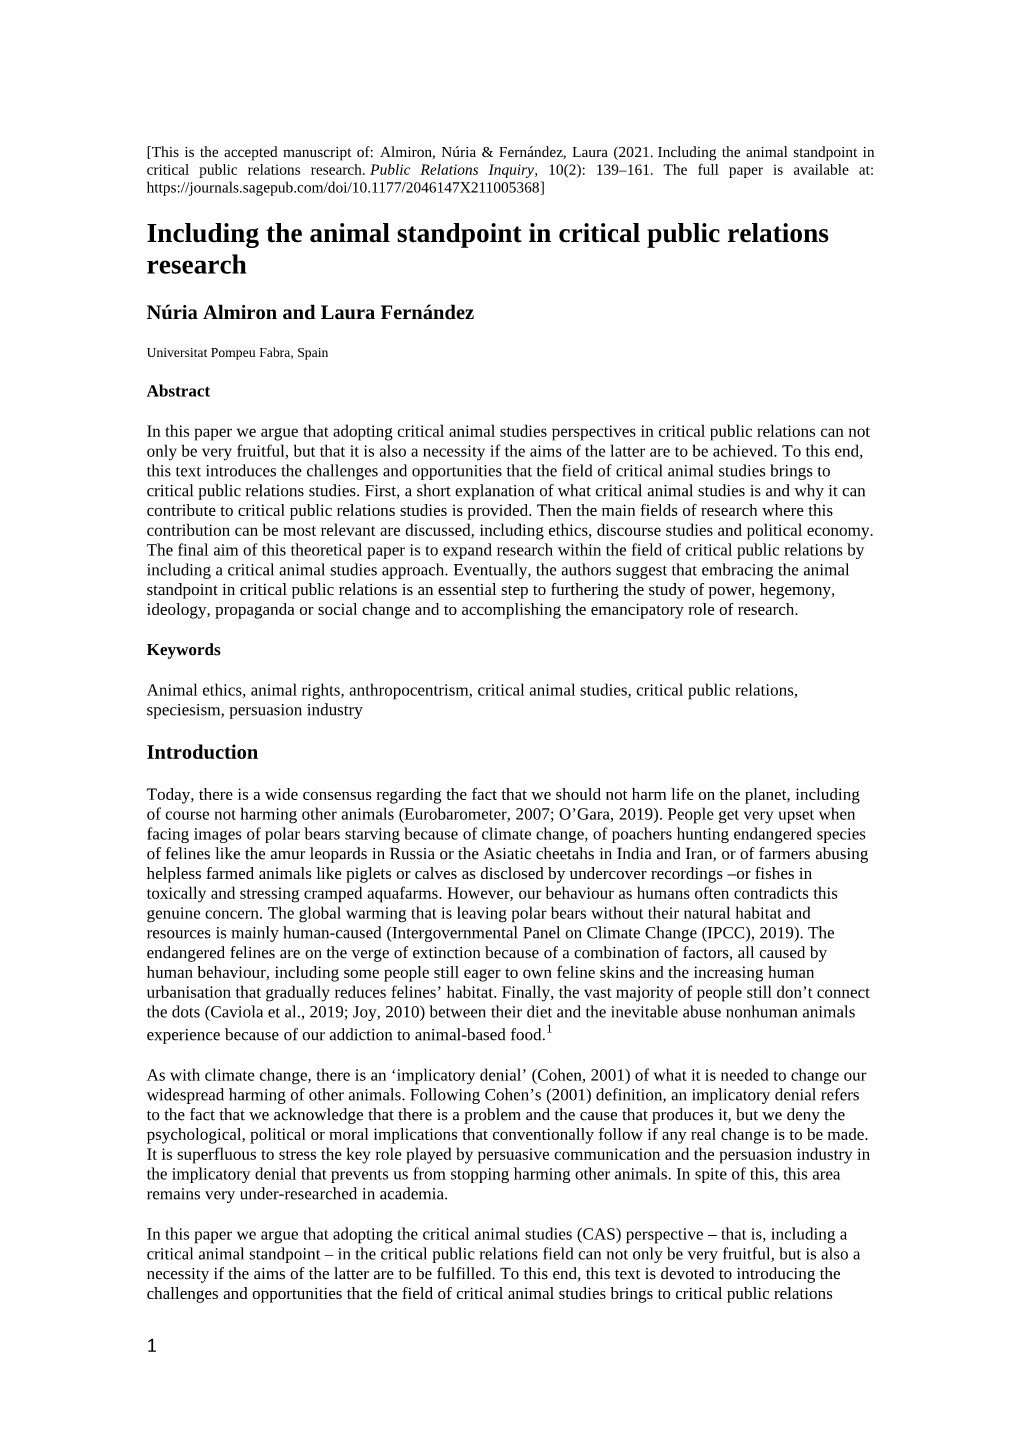 Including the Animal Standpoint in Critical Public Relations Research